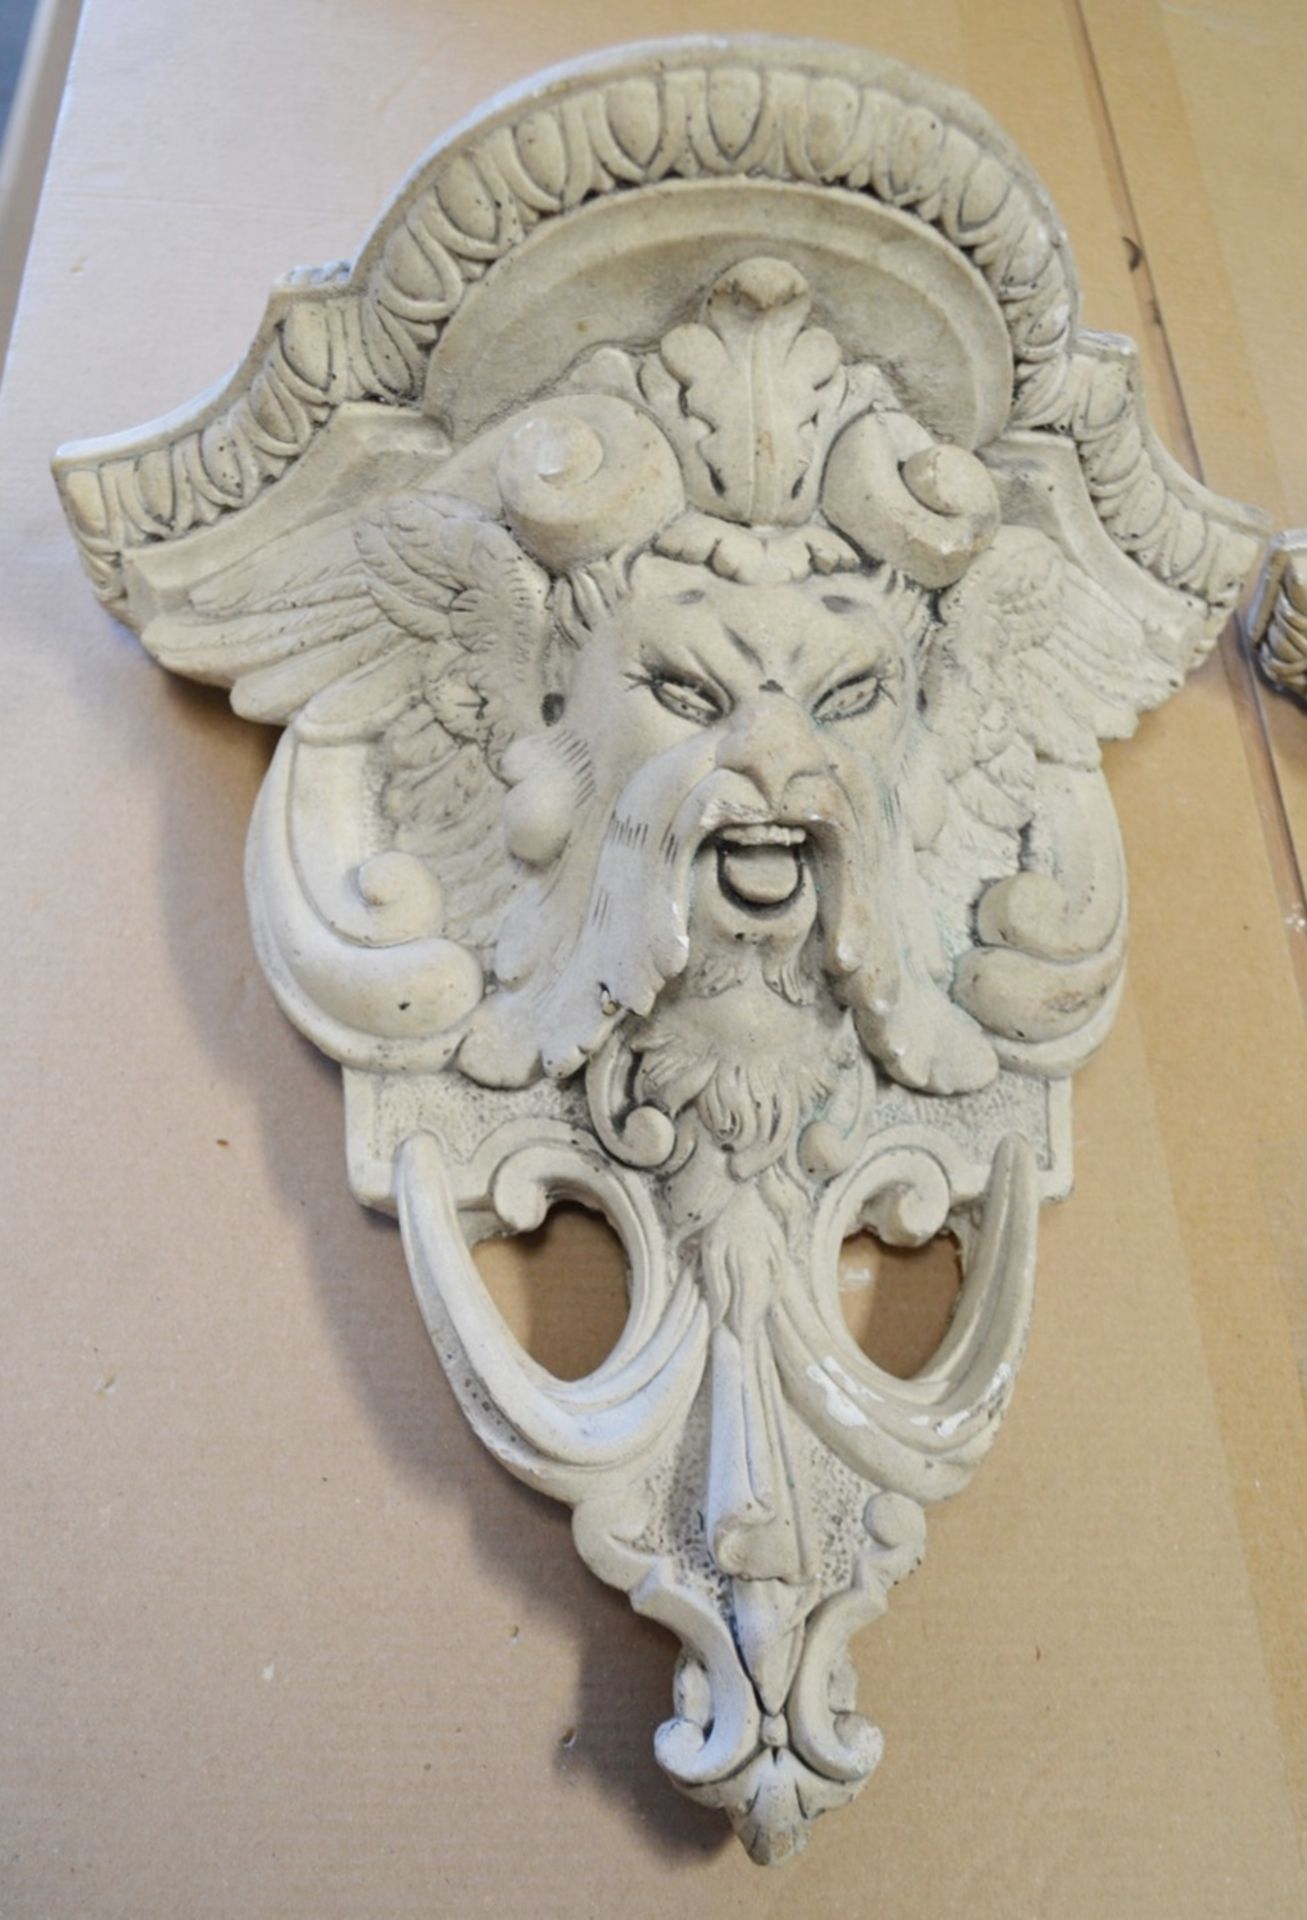 A Pair Of Ornamental Plaster Gargoyles / Garden Plaques - Dimensions: W30 x H32 x D16cm - Used, In - Image 2 of 5